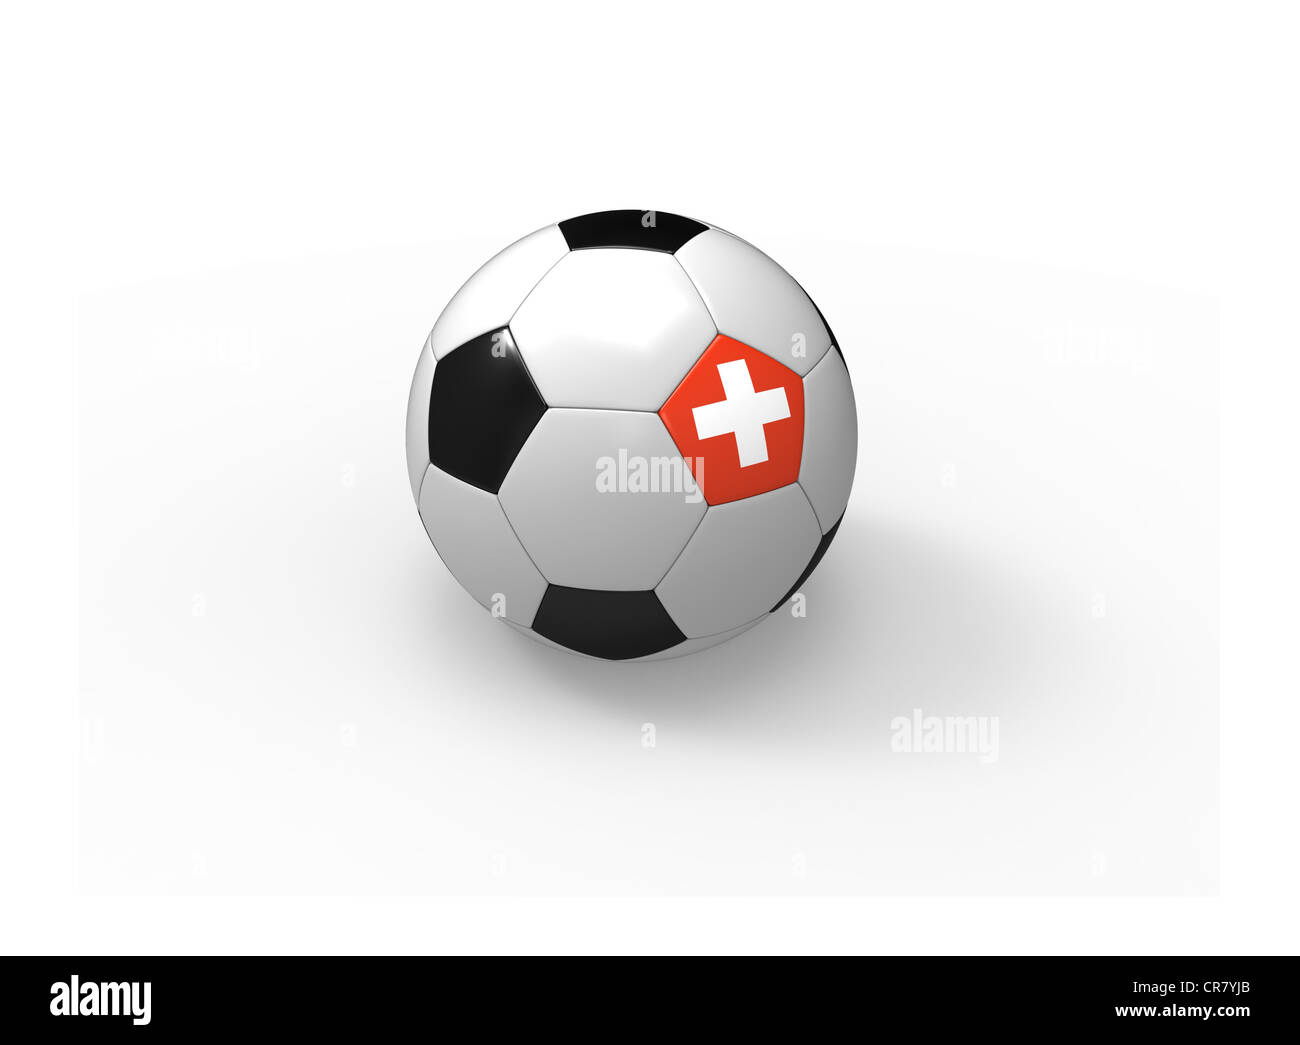 Soccer ball, 3d rendering with Switzerland flag, isolated on white background, light shadow Stock Photo